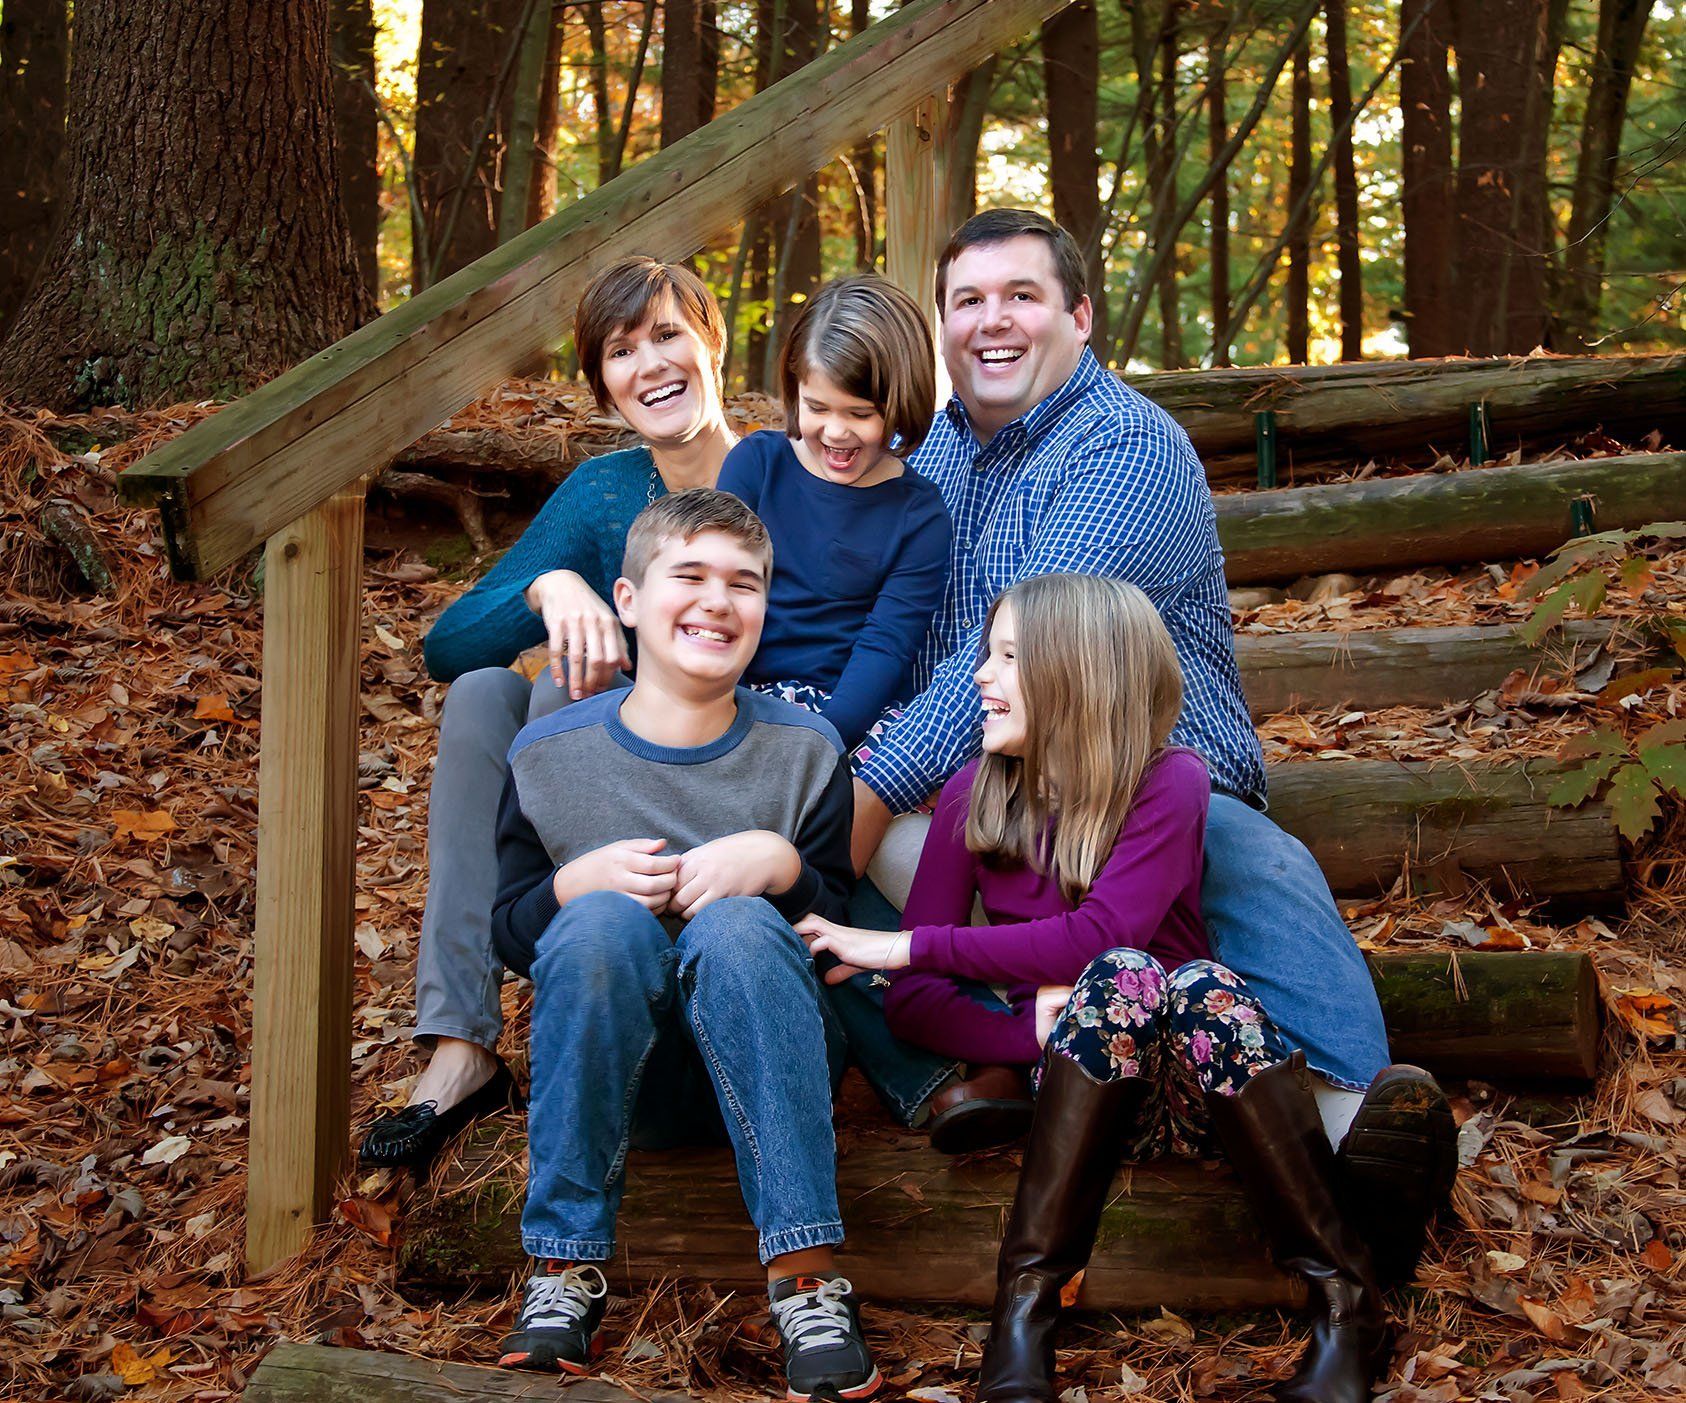 Mom, Dad and 3 kids laughing and tickling each other outside on the stairs in the woods with leaves on the ground